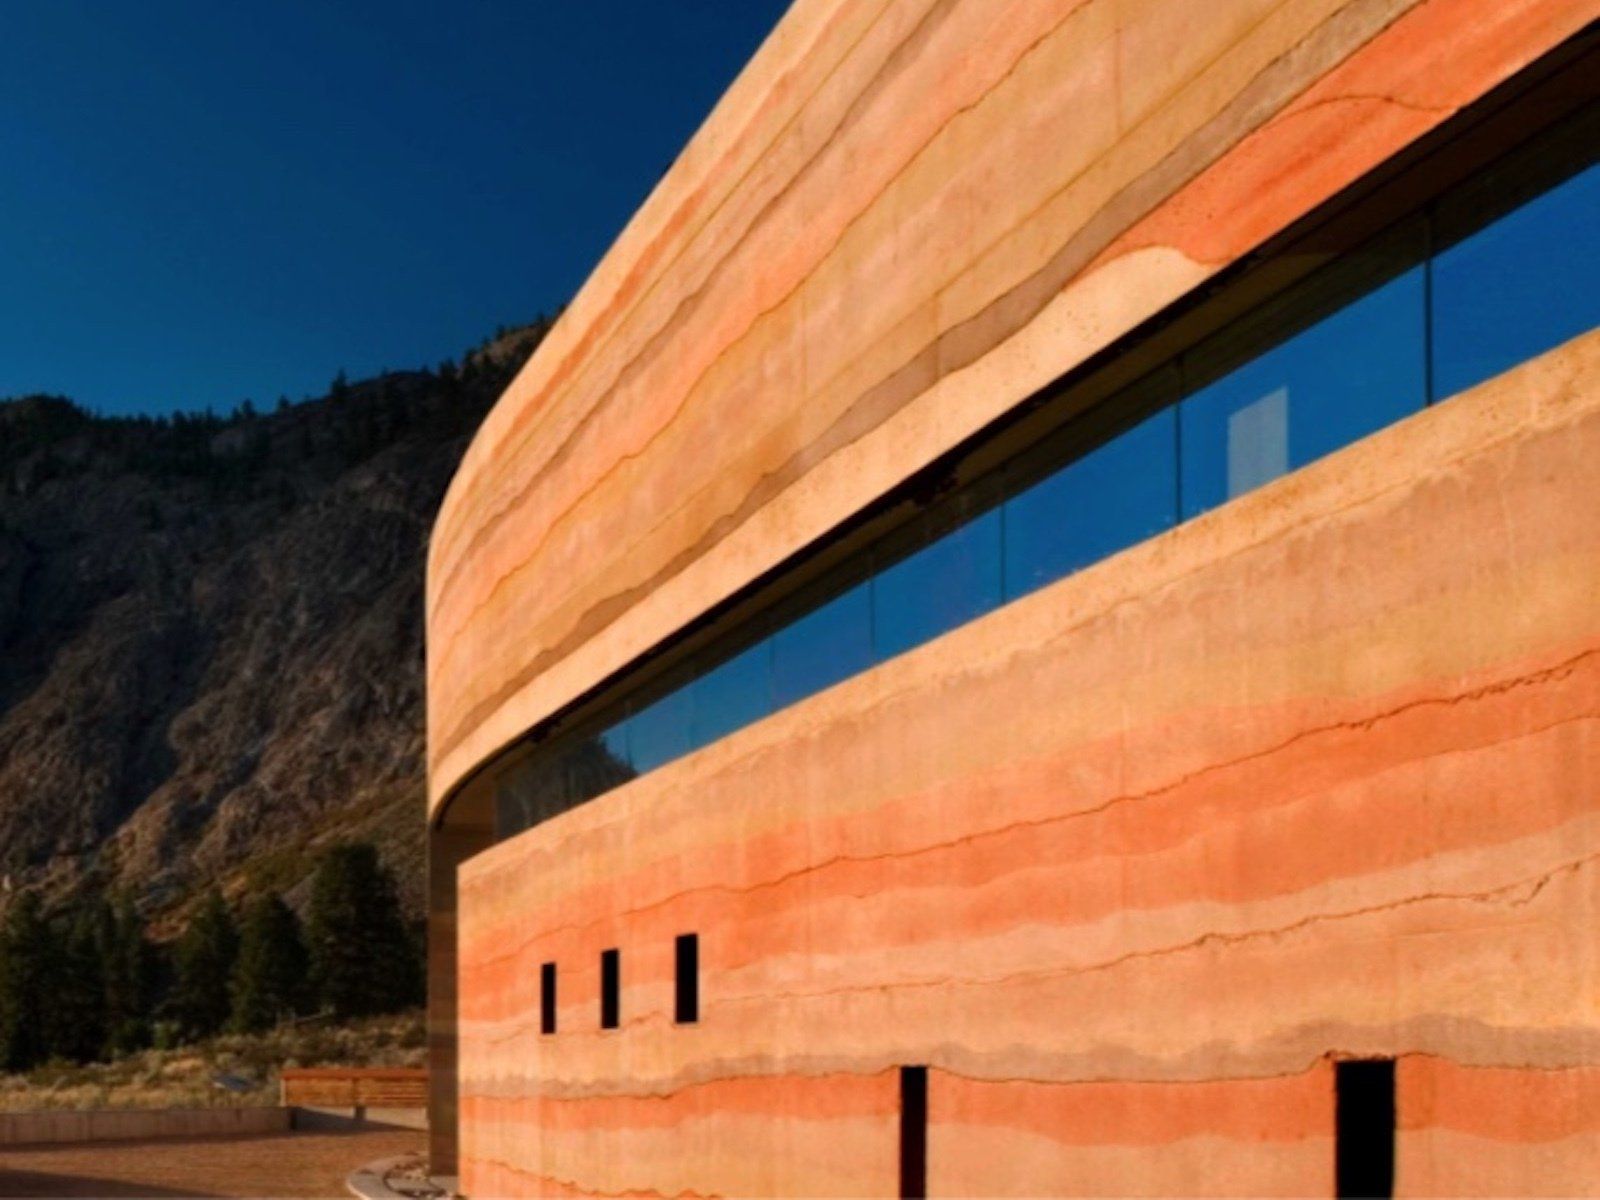 nk mip side view of curving rammed earth wall in various colors with horizontal window opening